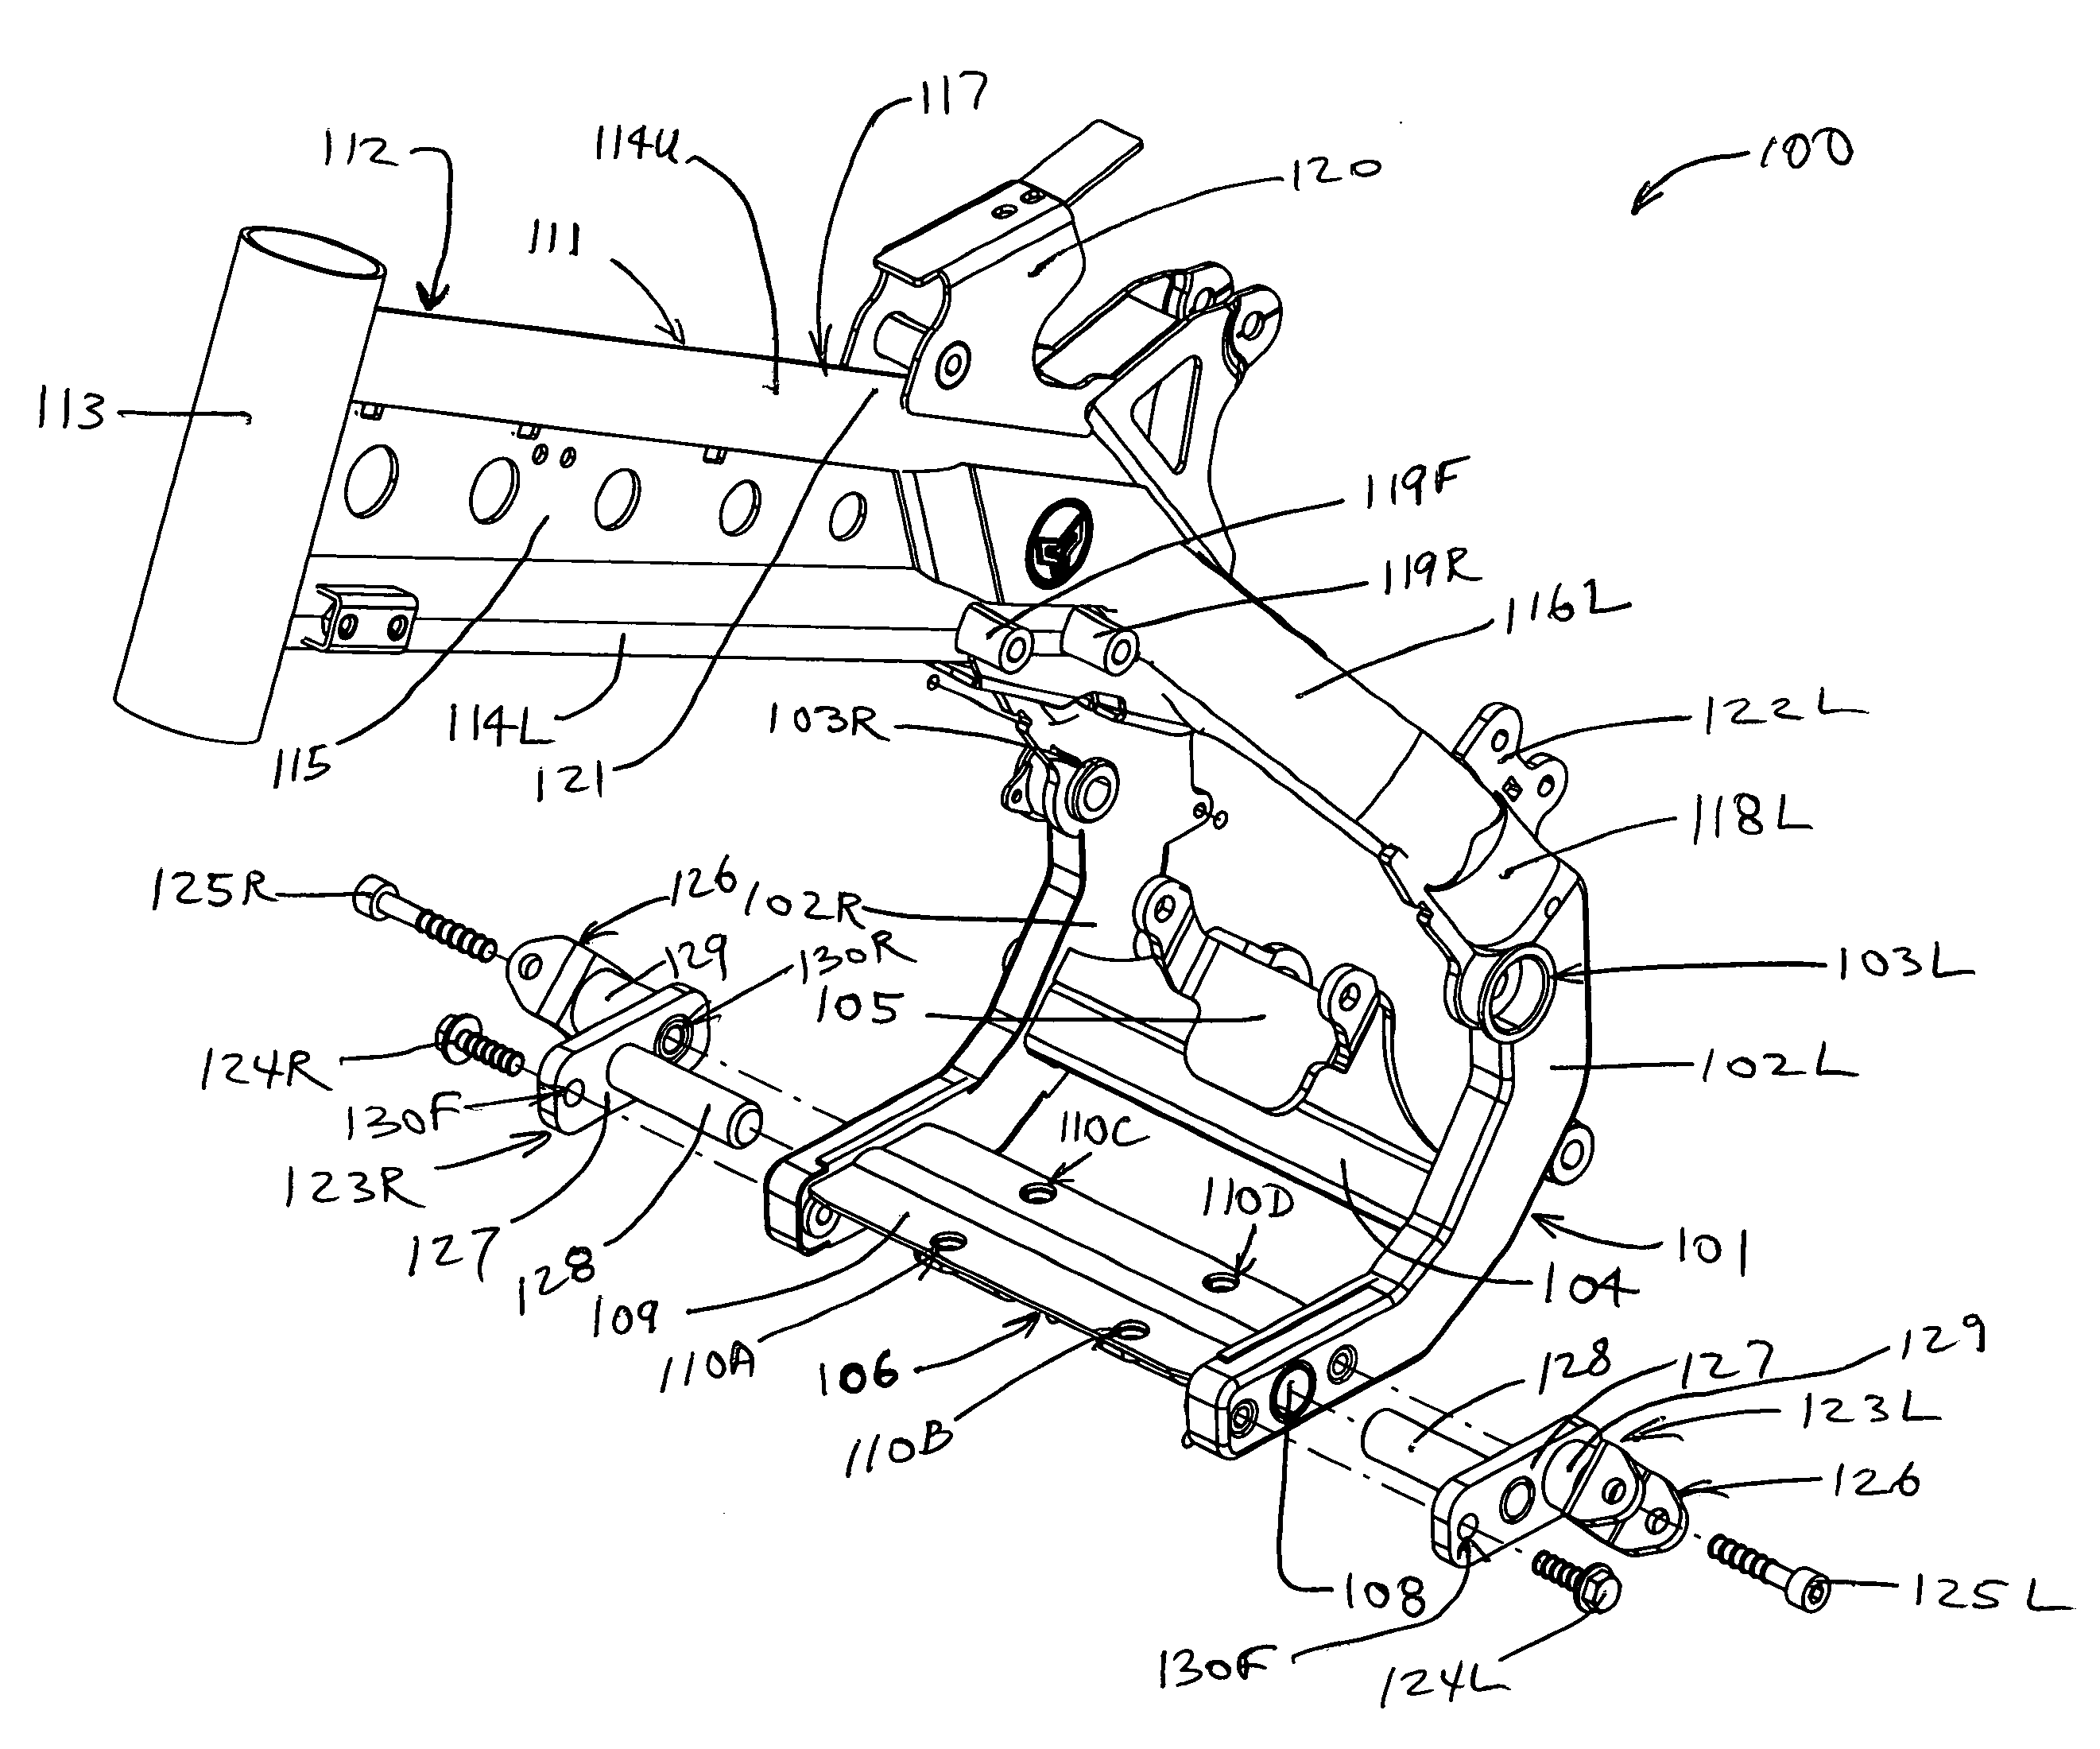 Backbone motorcycle frame having a partial cradle which supports a rear portion of a unitized engine and transmission and to which foot peg assemblies are bolted